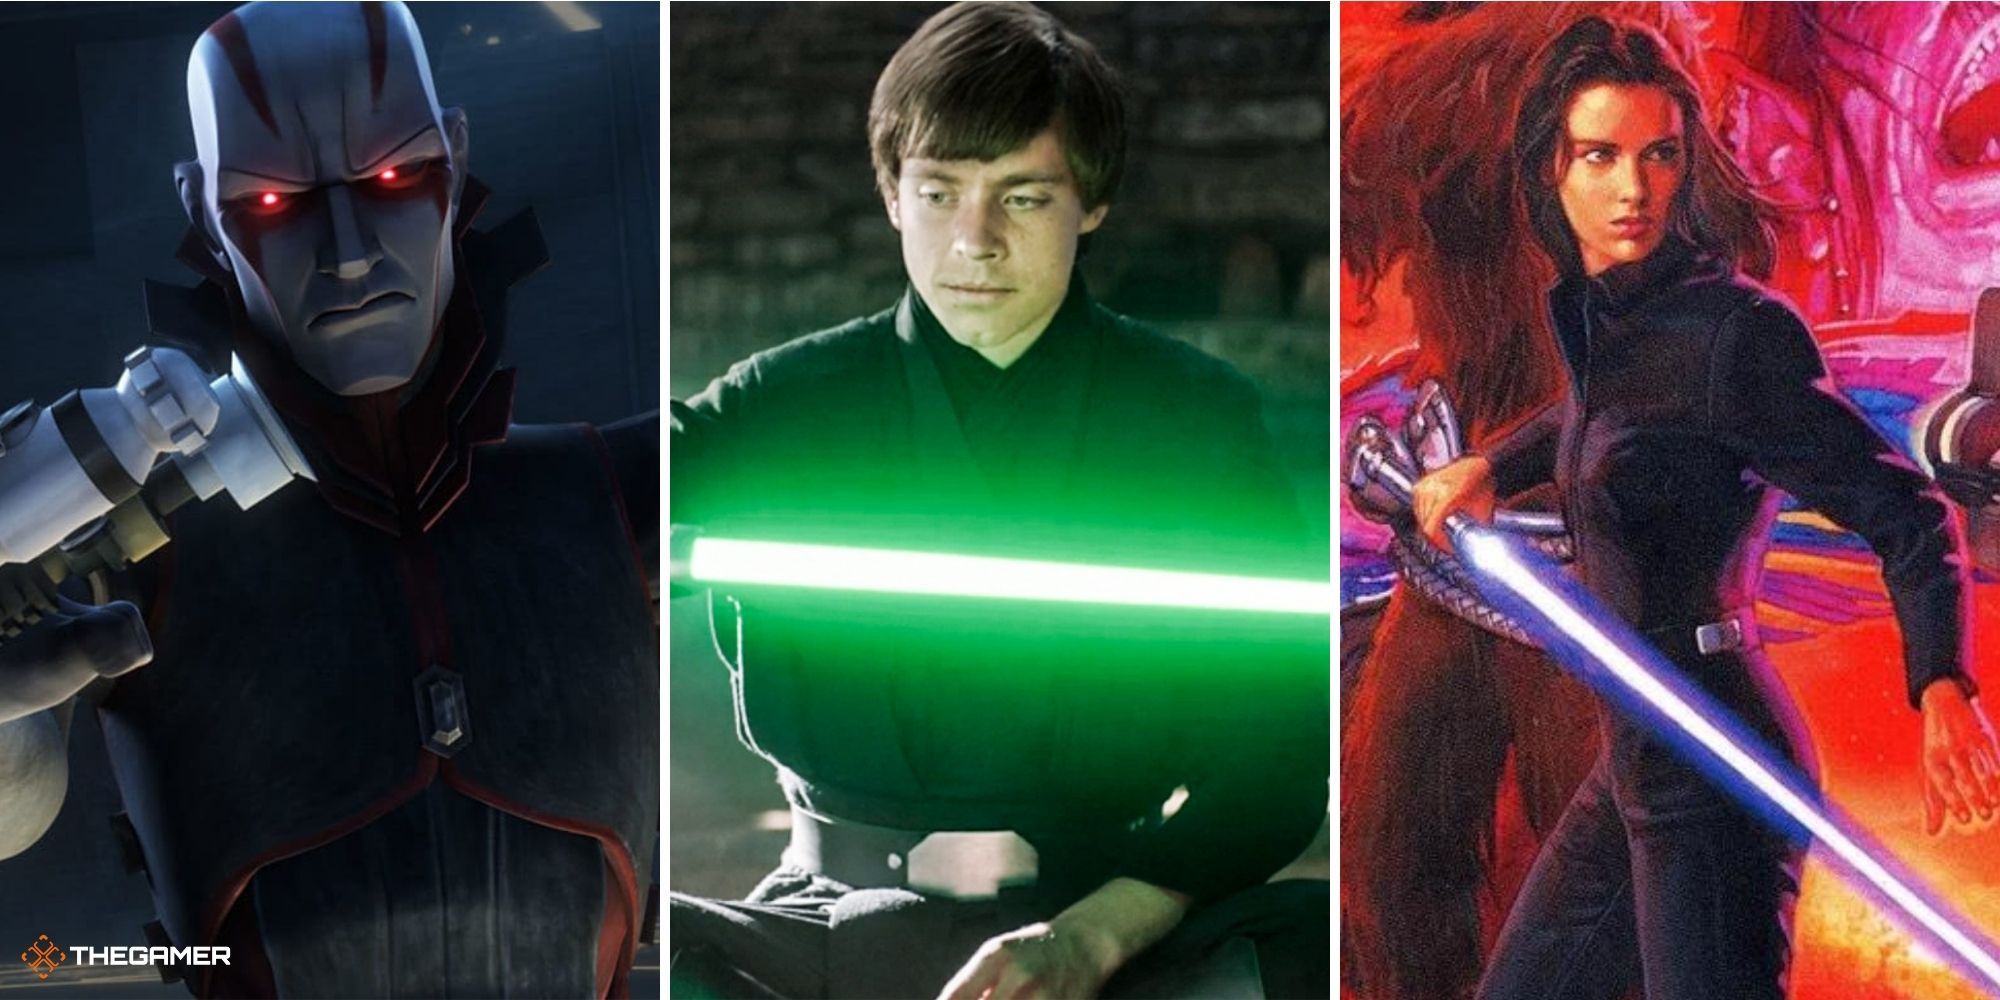 Who is the Best Jedi Ever?